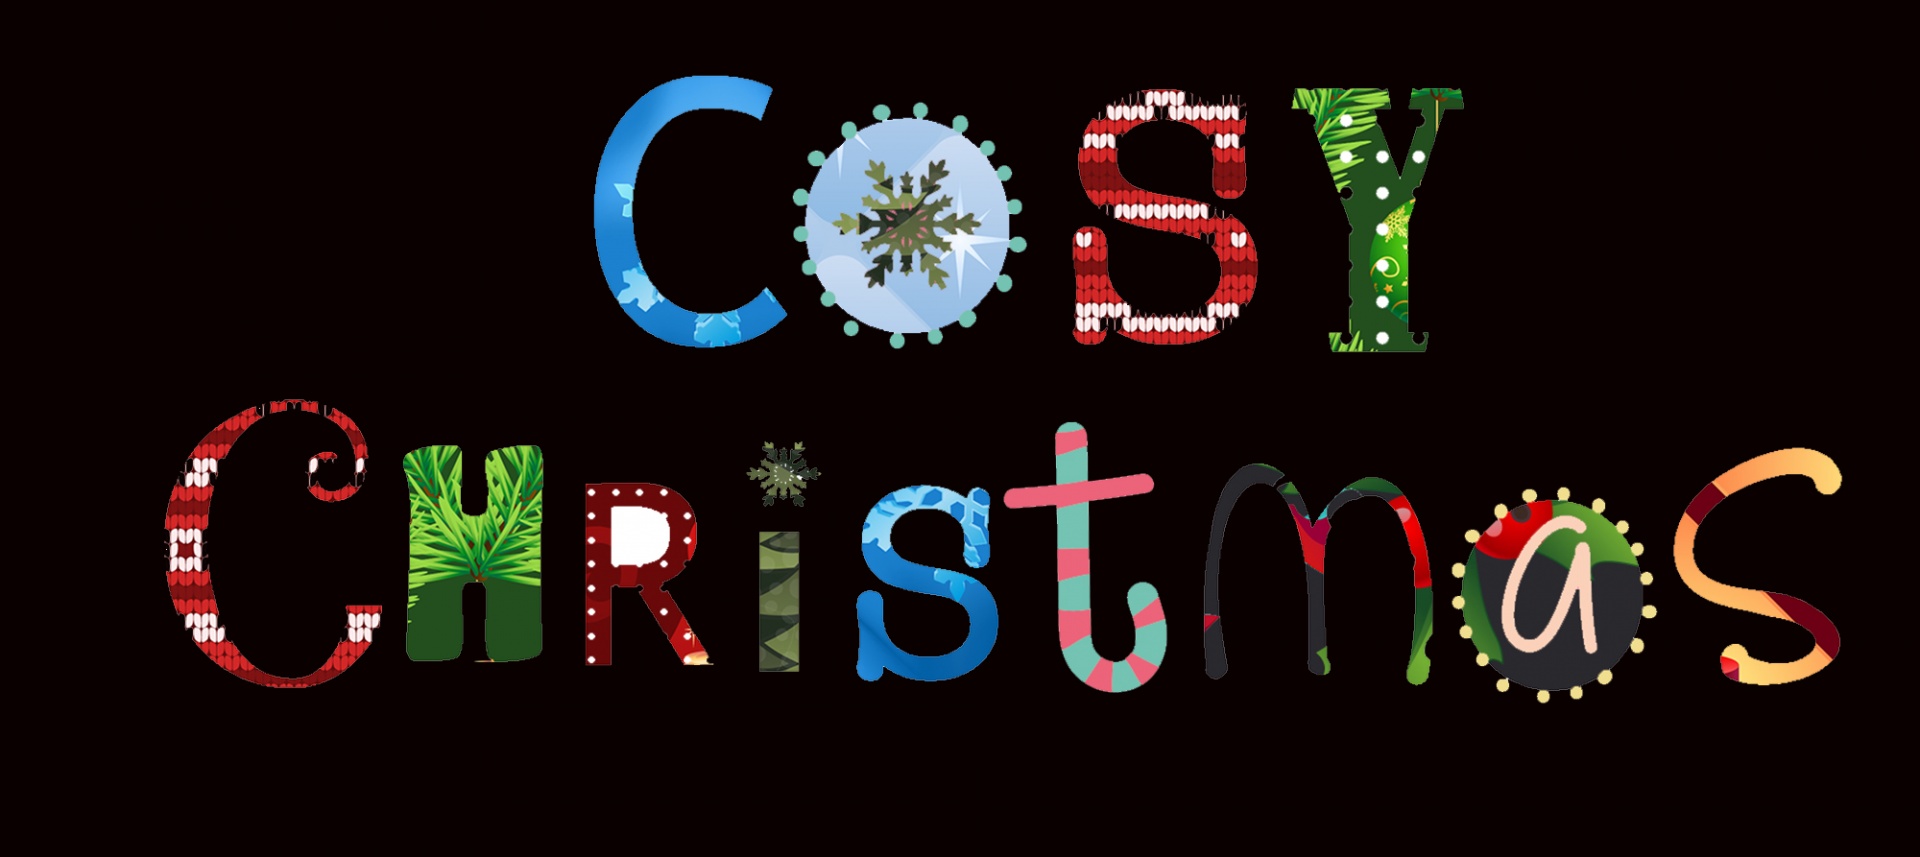 Christmas letters spelling cosy christmas filled with different holiday designs on black background